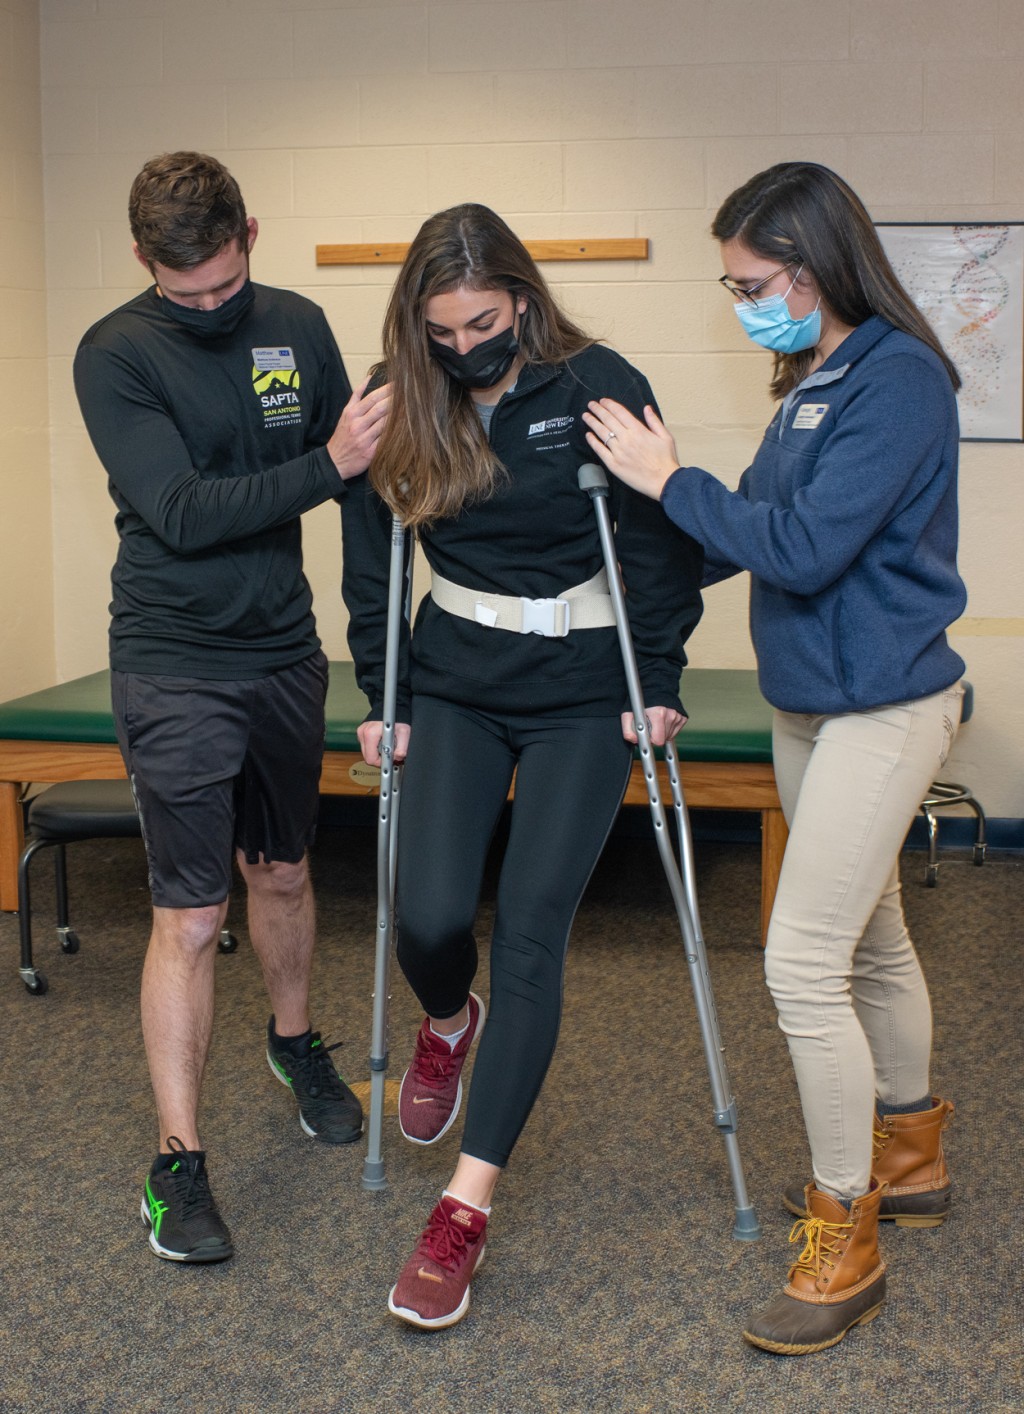 Two Physical Therapy students practice assisting a patient with new crutches